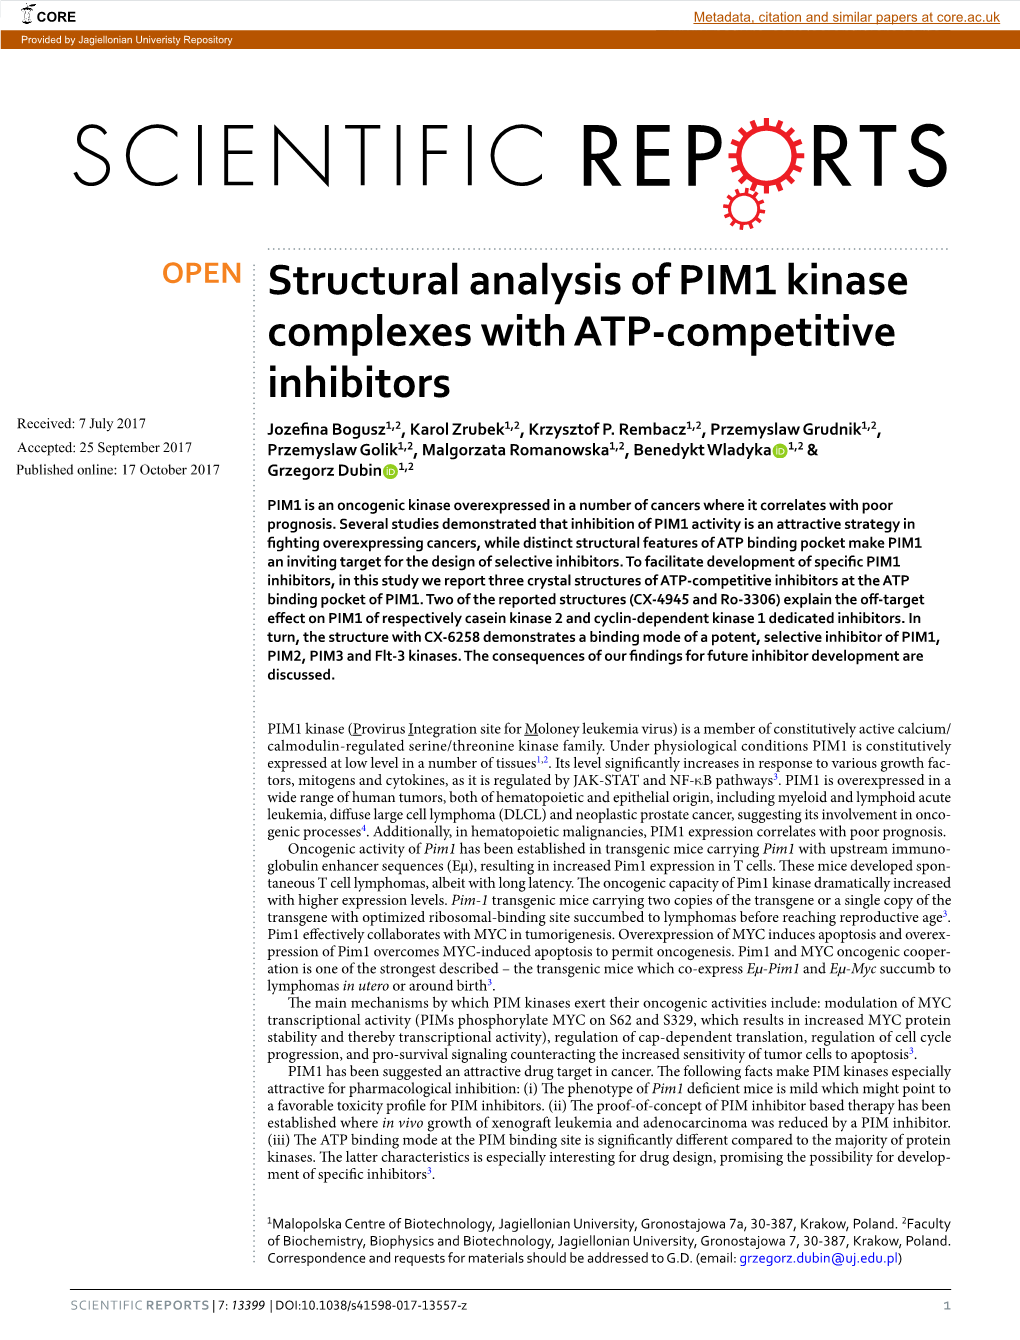 Structural Analysis of PIM1 Kinase Complexes with ATP-Competitive Inhibitors Received: 7 July 2017 Jozefna Bogusz1,2, Karol Zrubek1,2, Krzysztof P